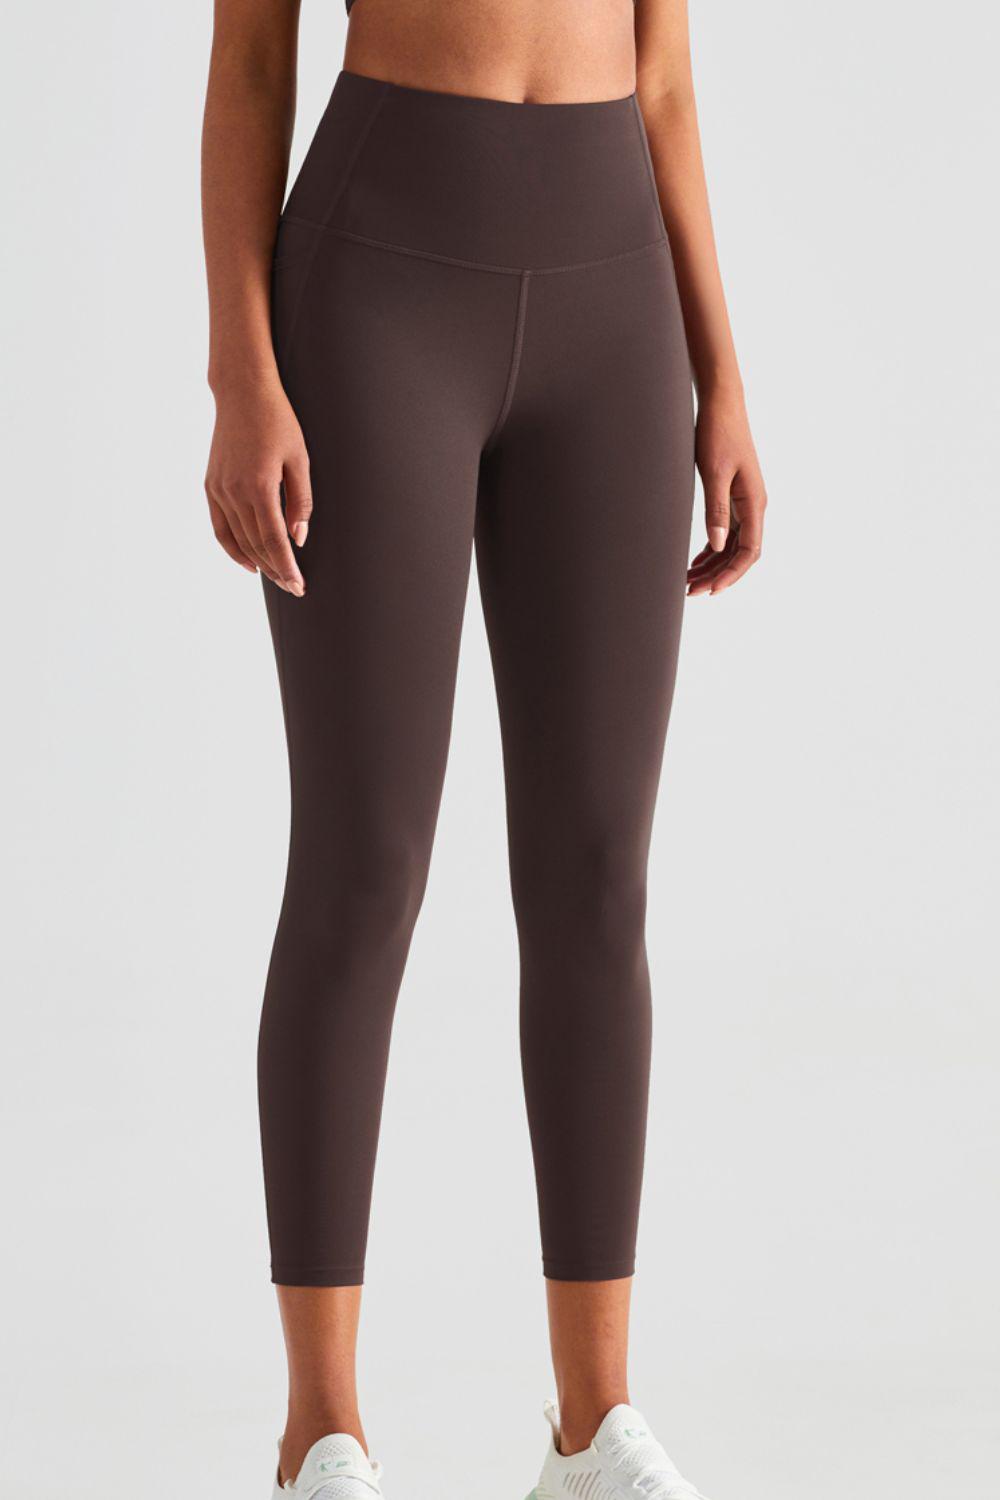 Wide Waistband Sports Leggings with Pockets-BOTTOM SIZES SMALL MEDIUM LARGE-[Adult]-[Female]-Chocolate-4-2022 Online Blue Zone Planet